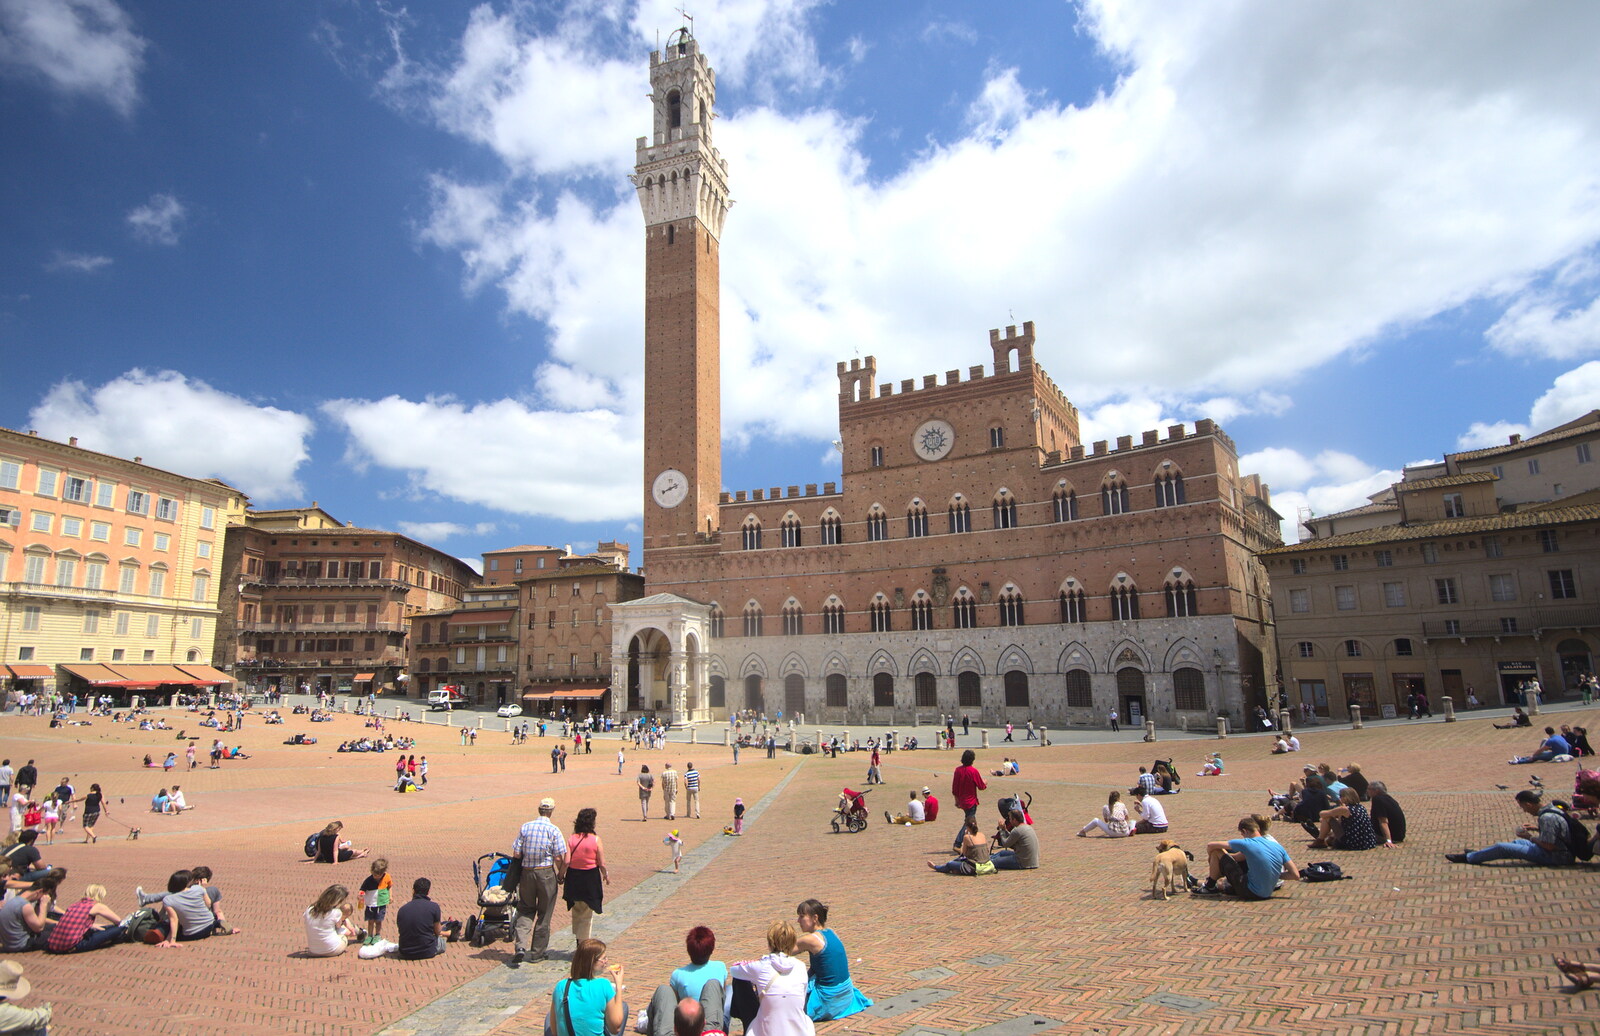 A Tuscan Winery and a Trip to Siena, Tuscany, Italy - 10th June 2013: A dramatic fish-eye view of the Piazza del Campo